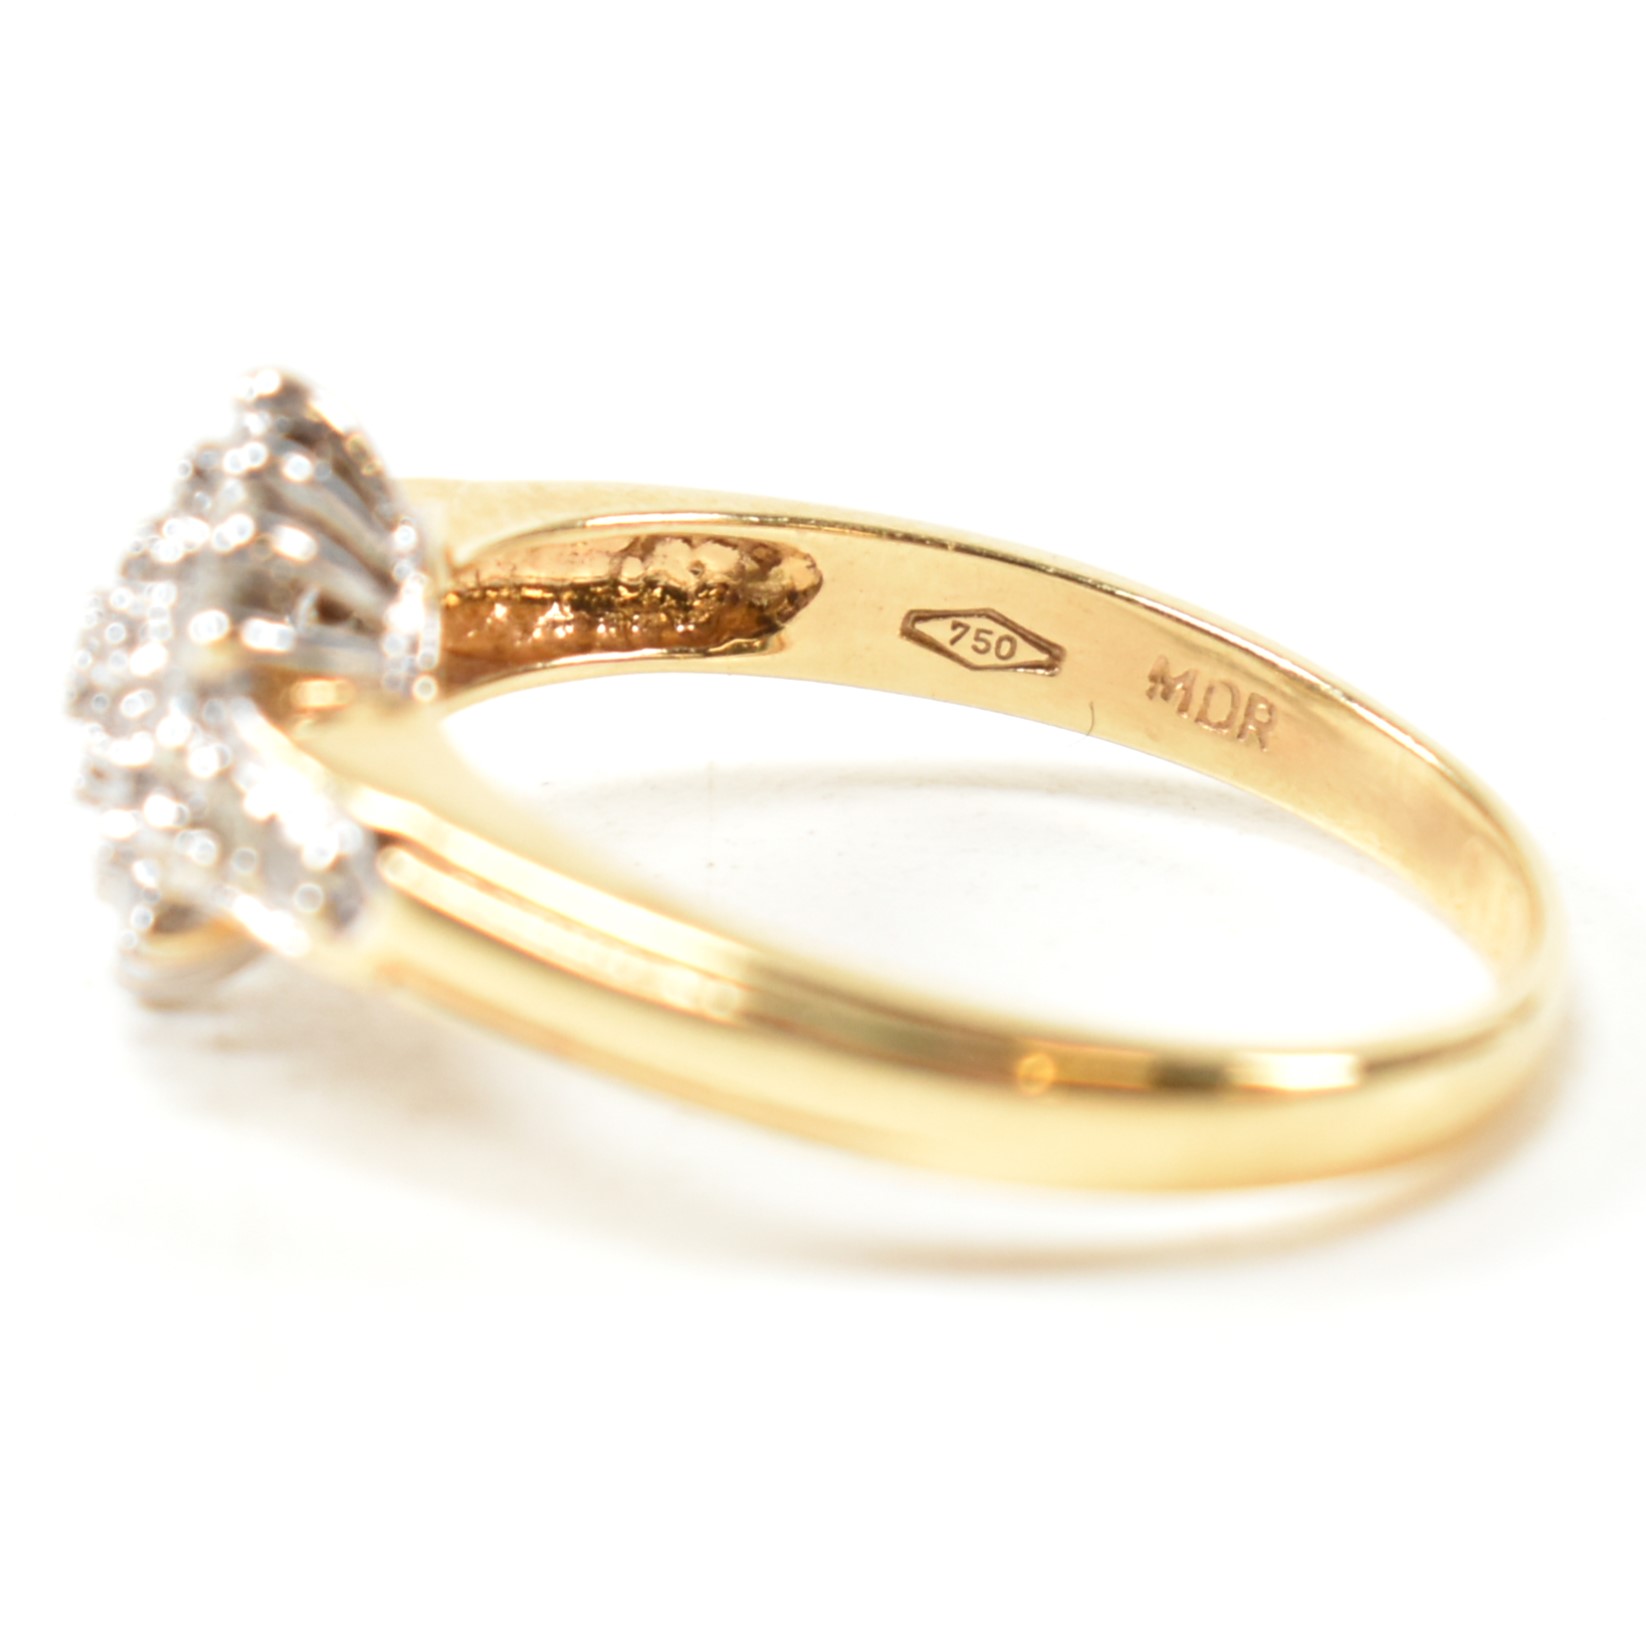 HALLMARKED 18CT GOLD & DIAMOND CLUSTER RING - Image 6 of 10